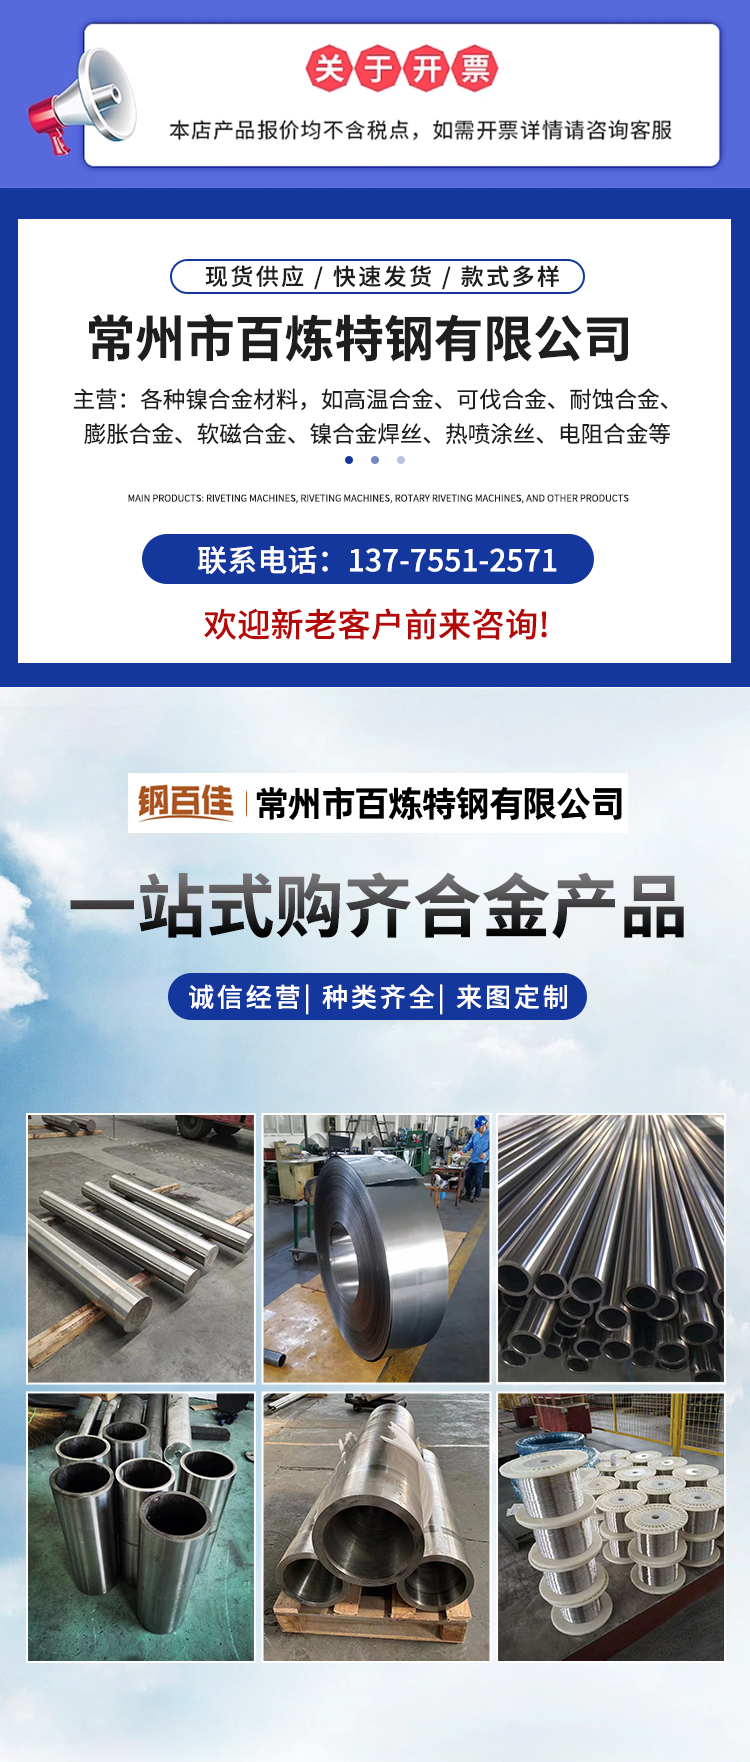 Iron nickel cobalt alloy with good tensile strength, professional alloy manufacturer of Bailian special steel